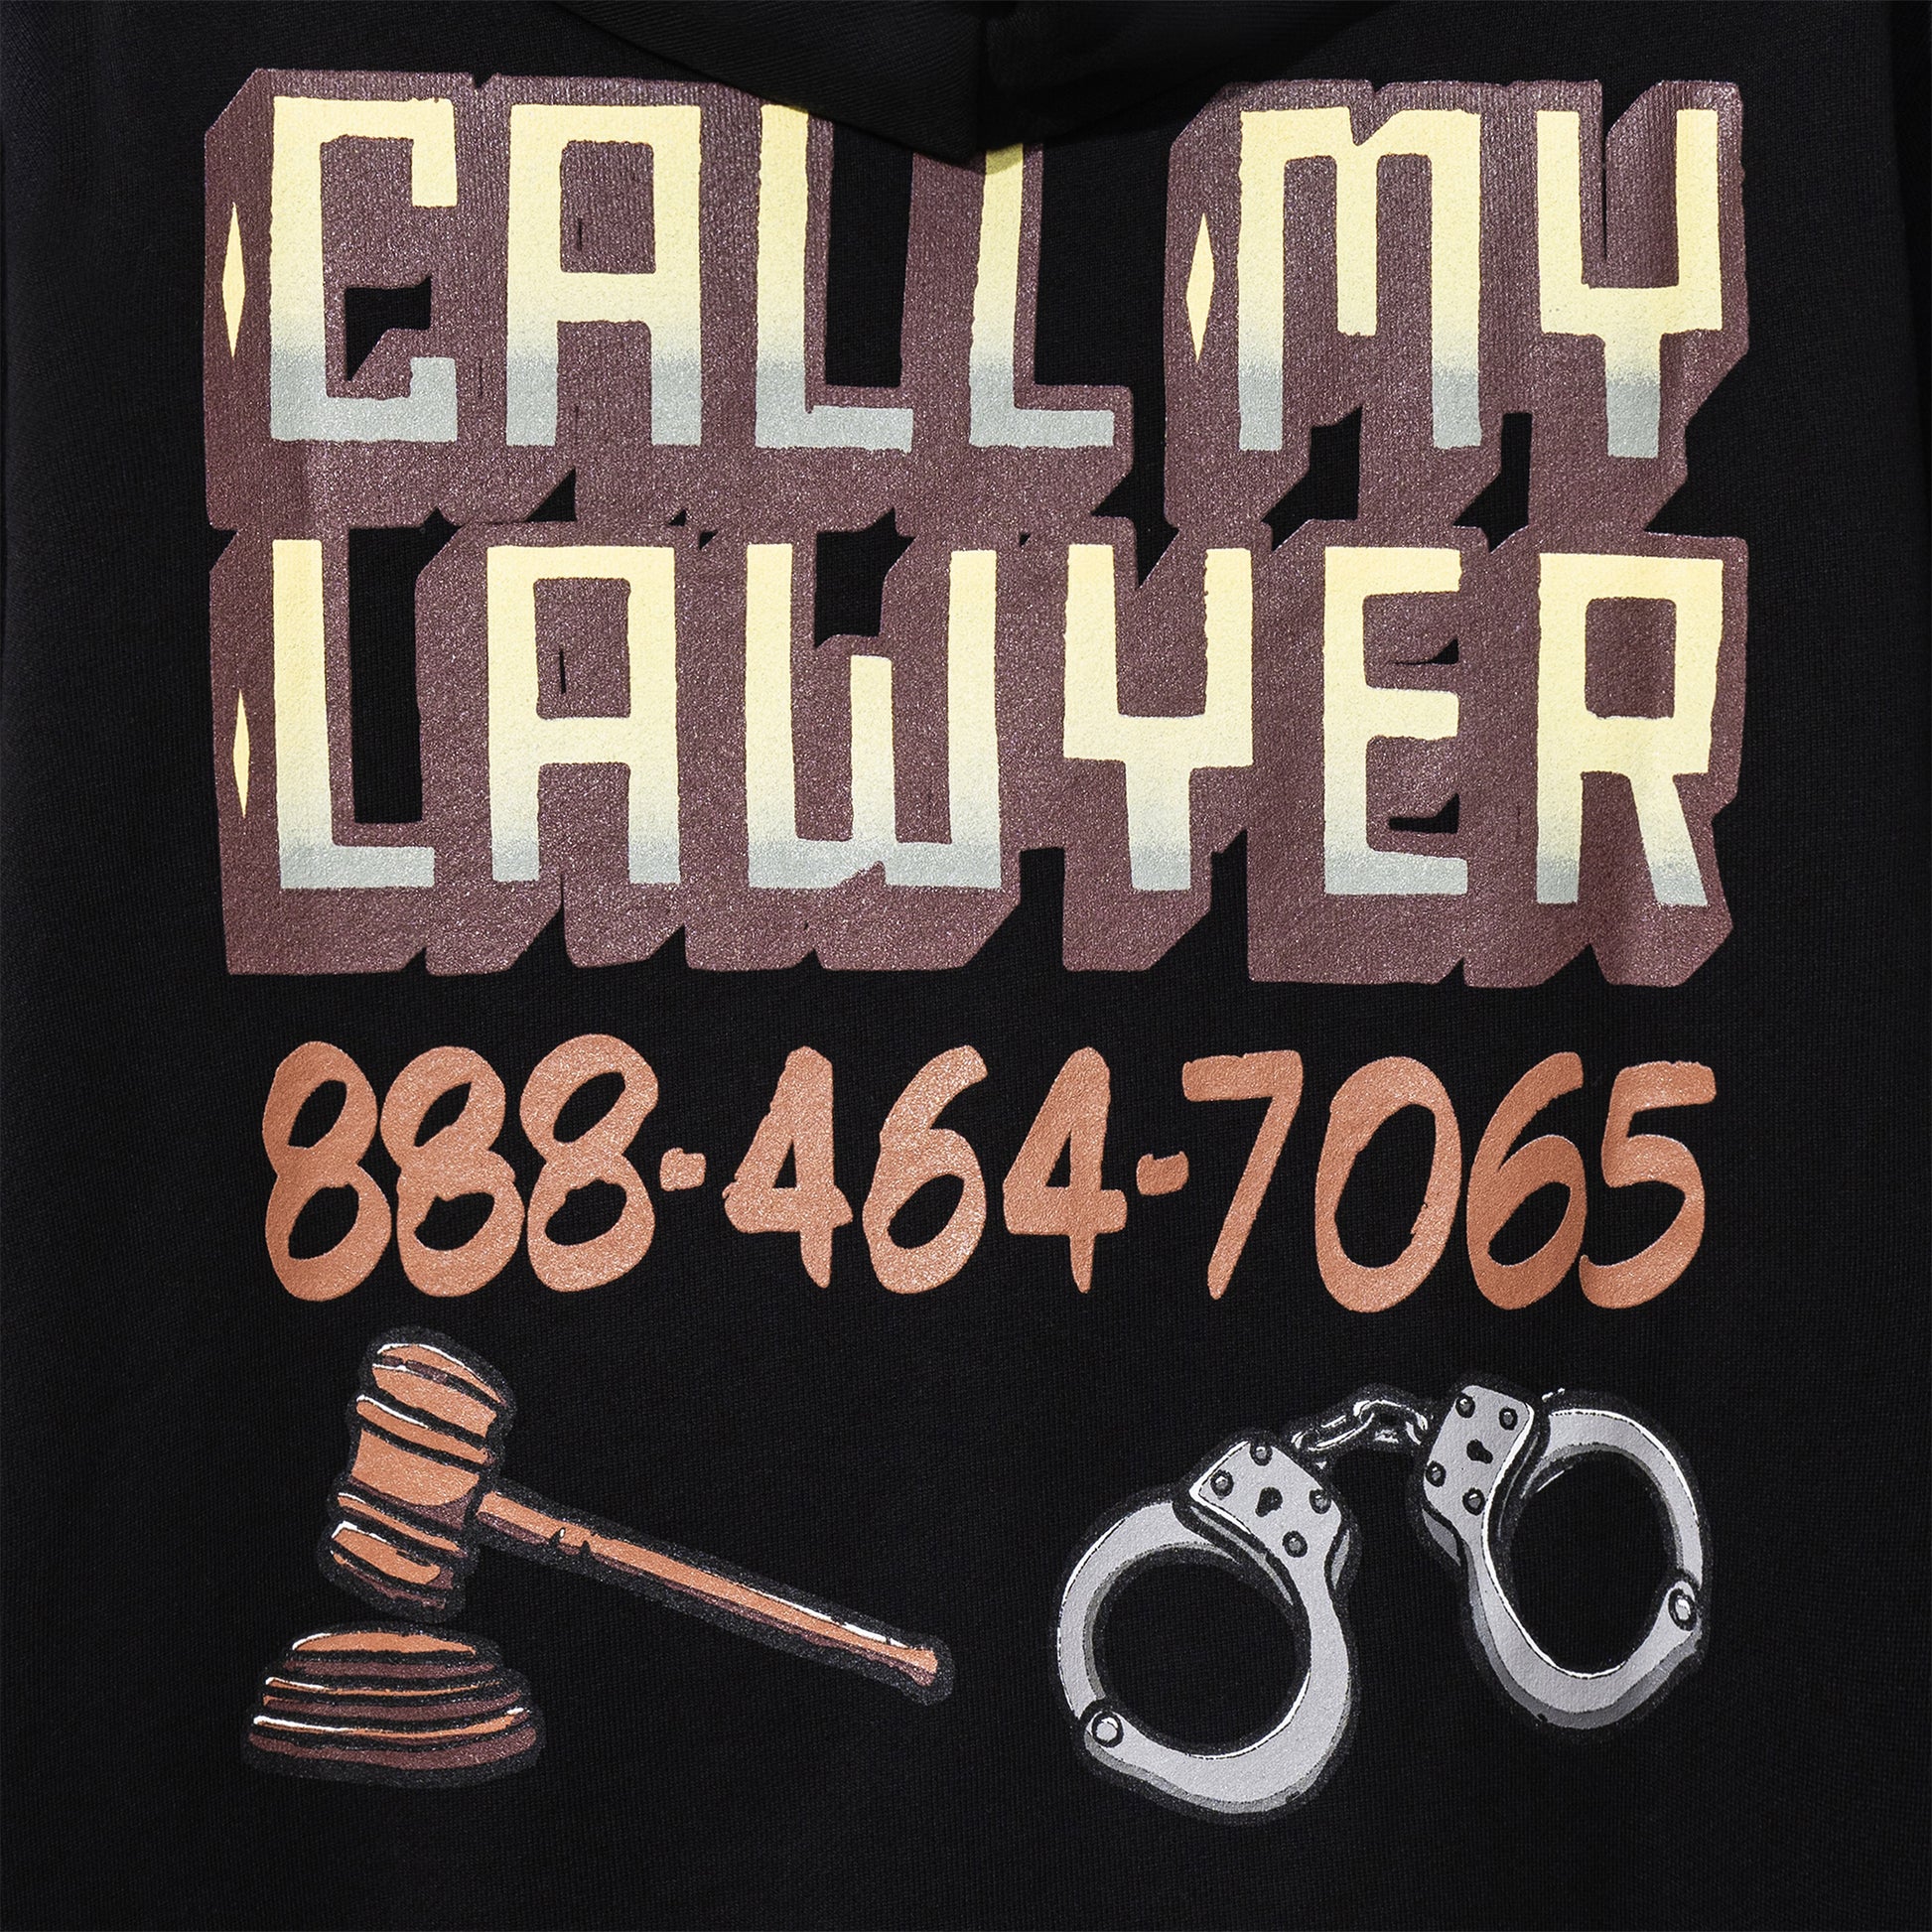 MARKET clothing brand CALL MY LAWYER SIGN HOODIE. Find more graphic tees, hats and more at MarketStudios.com. Formally Chinatown Market.